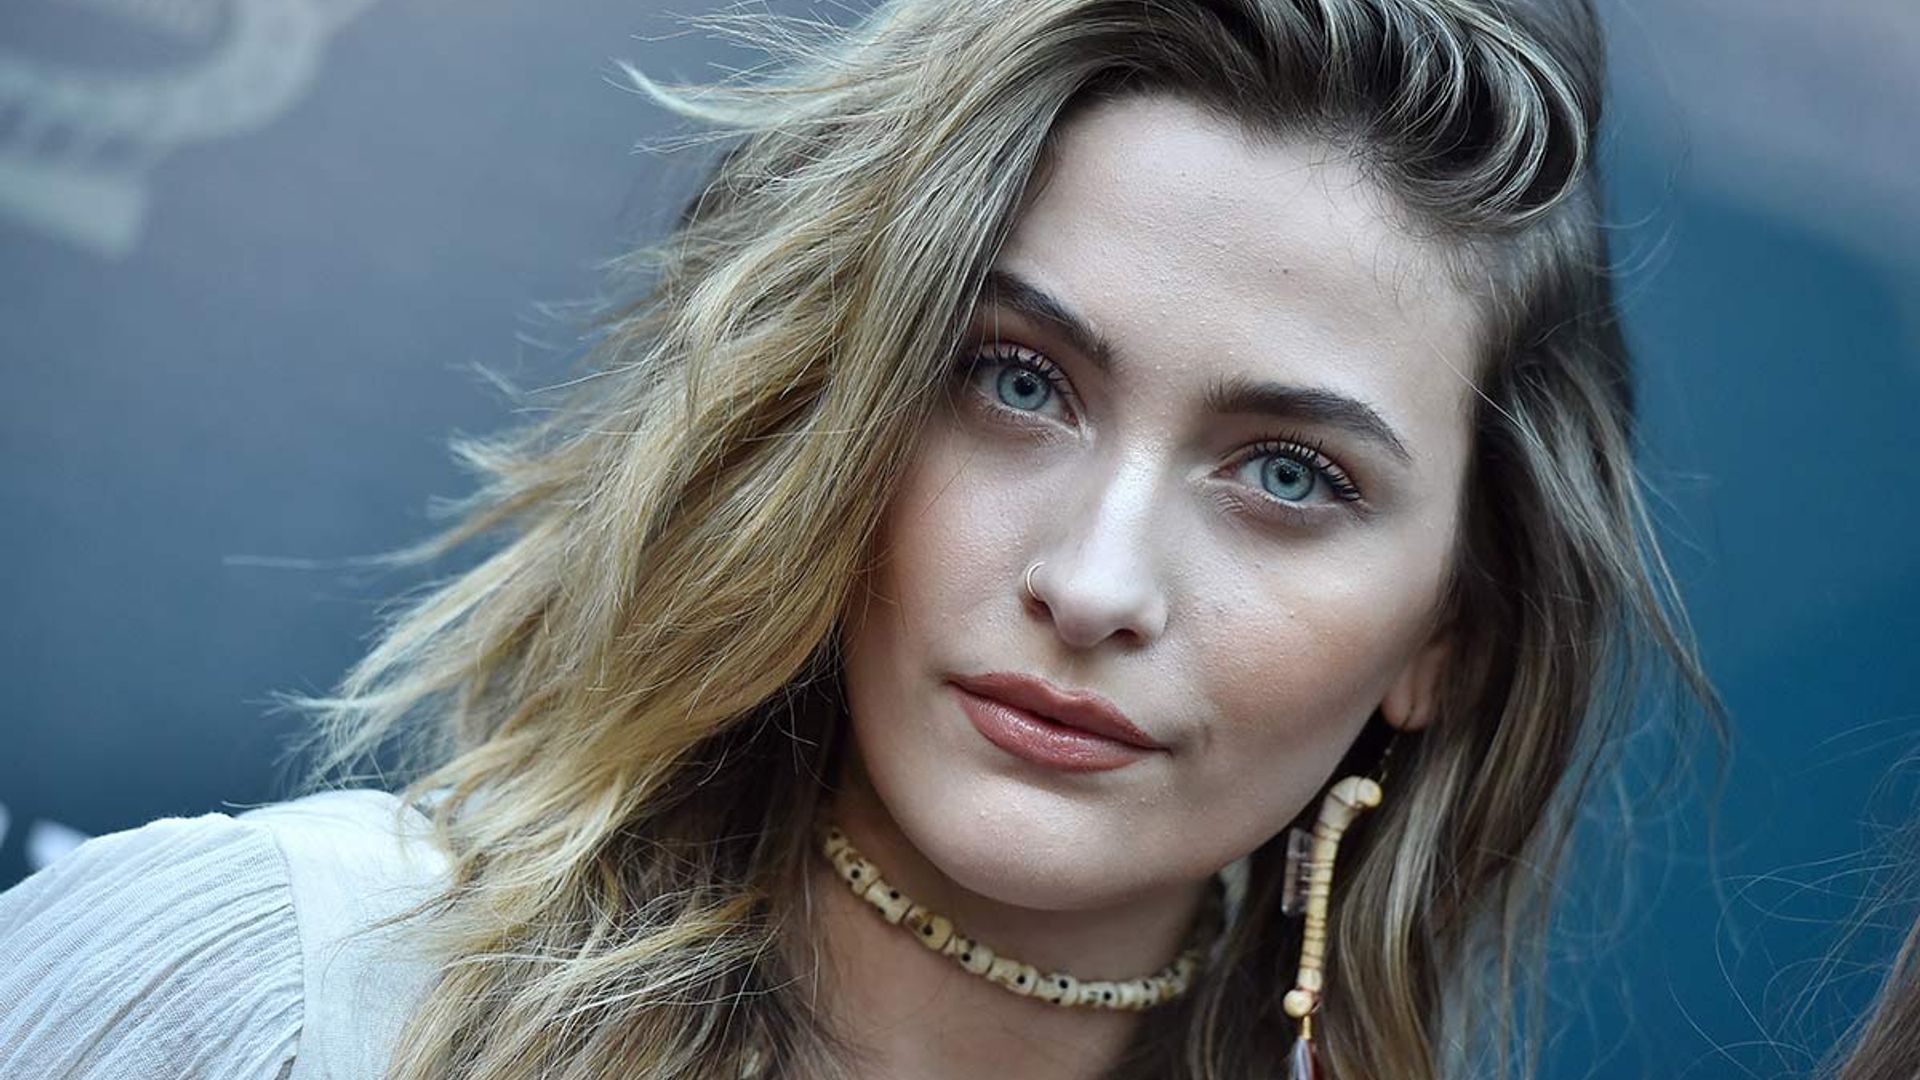 Michael Jackson's daughter Paris shares rare insight into growing up with famous father